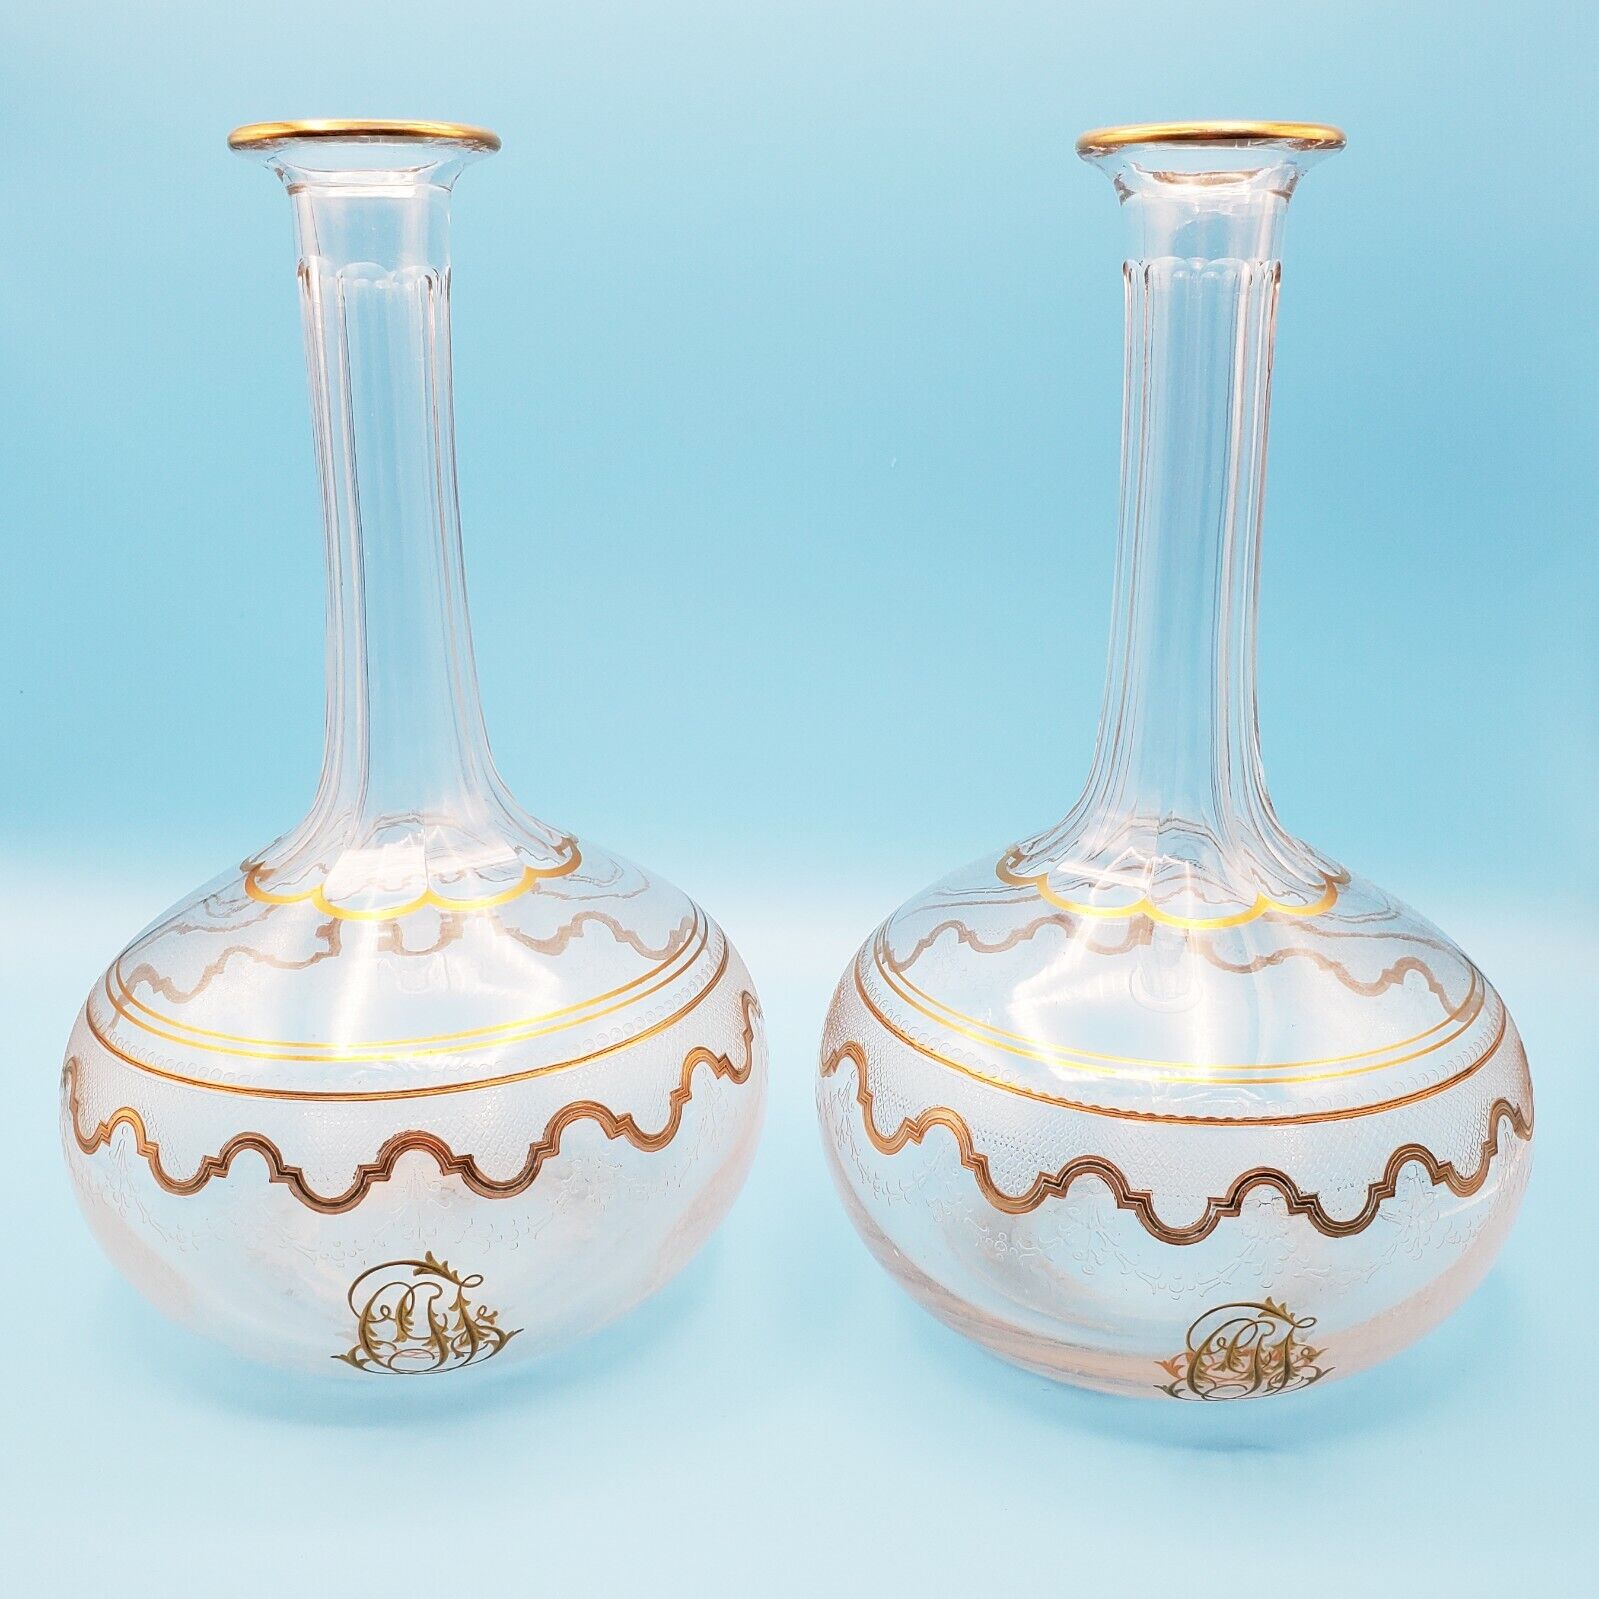 Antique Pair Gilded Saint Louis Crystal Decanters 19th c. Beethoven Gold Accents